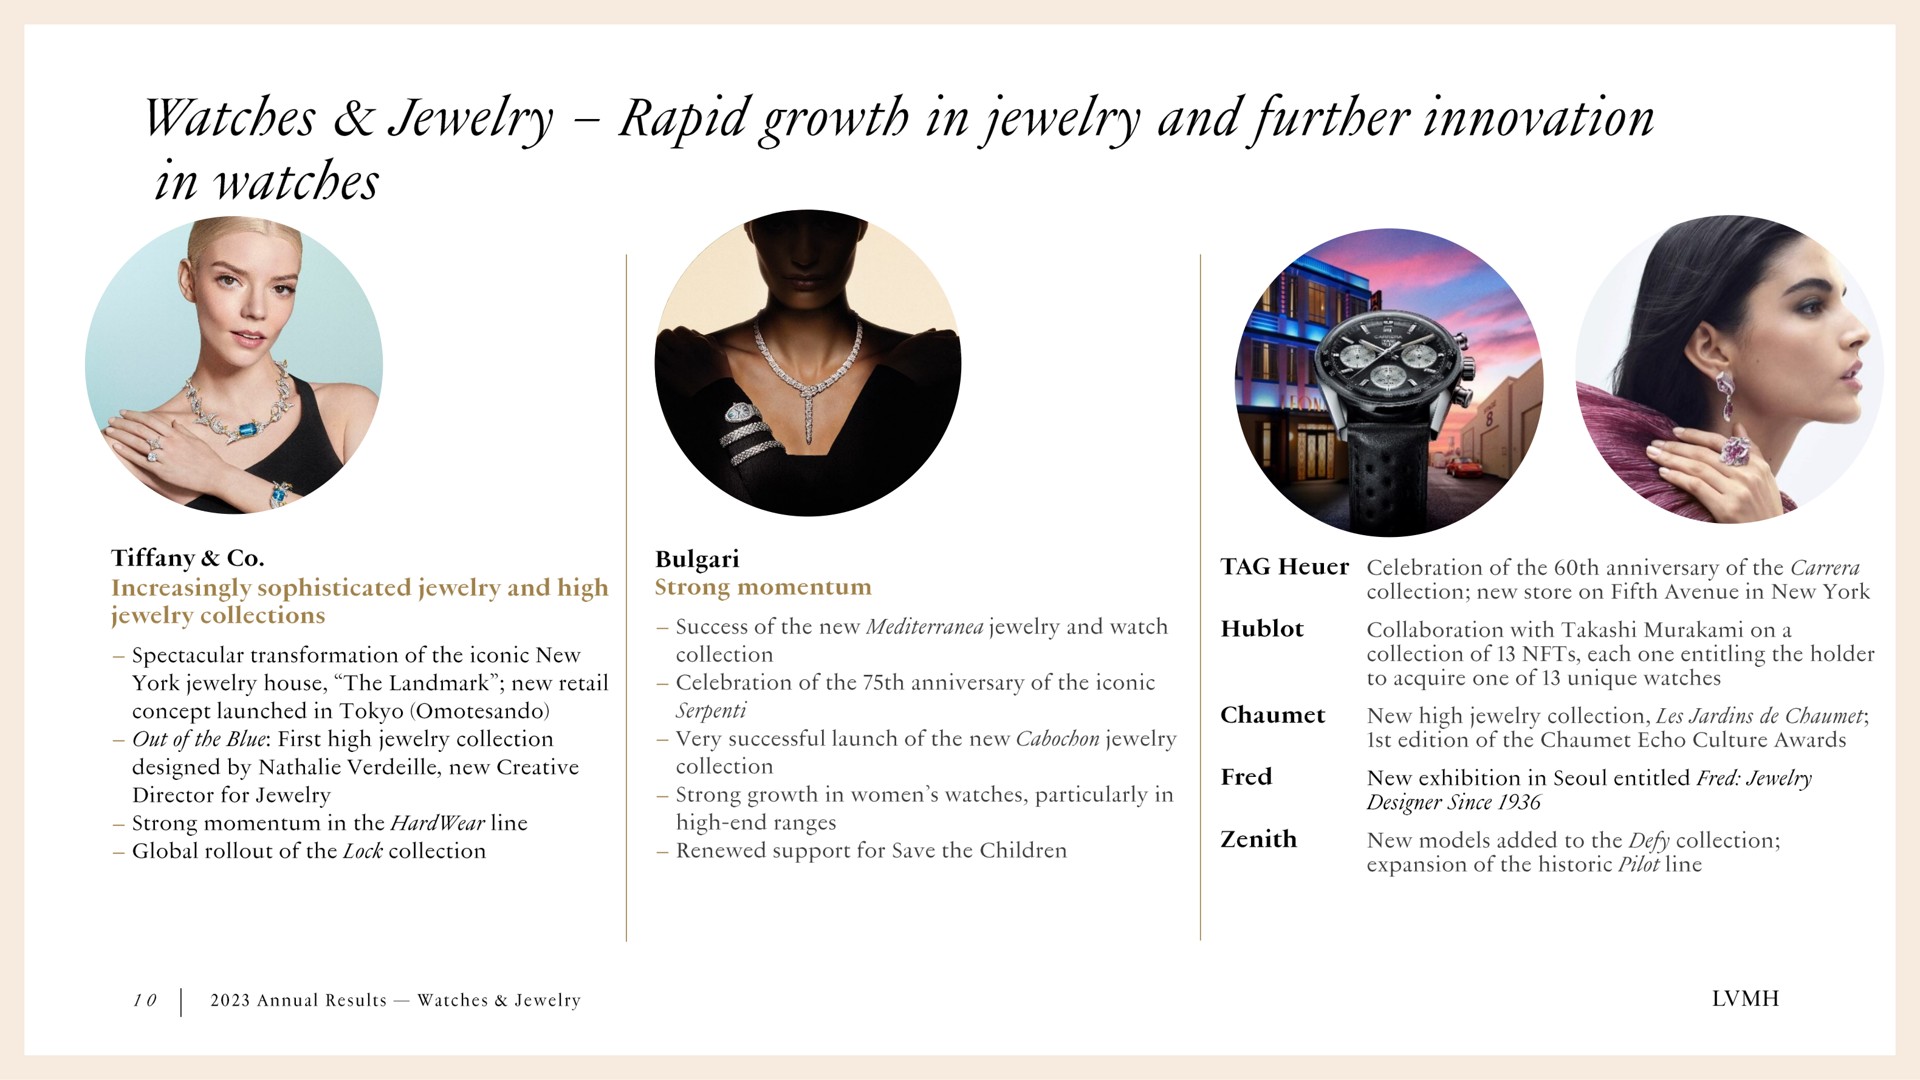 watches jewelry rapid growth in jewelry and further innovation | LVMH